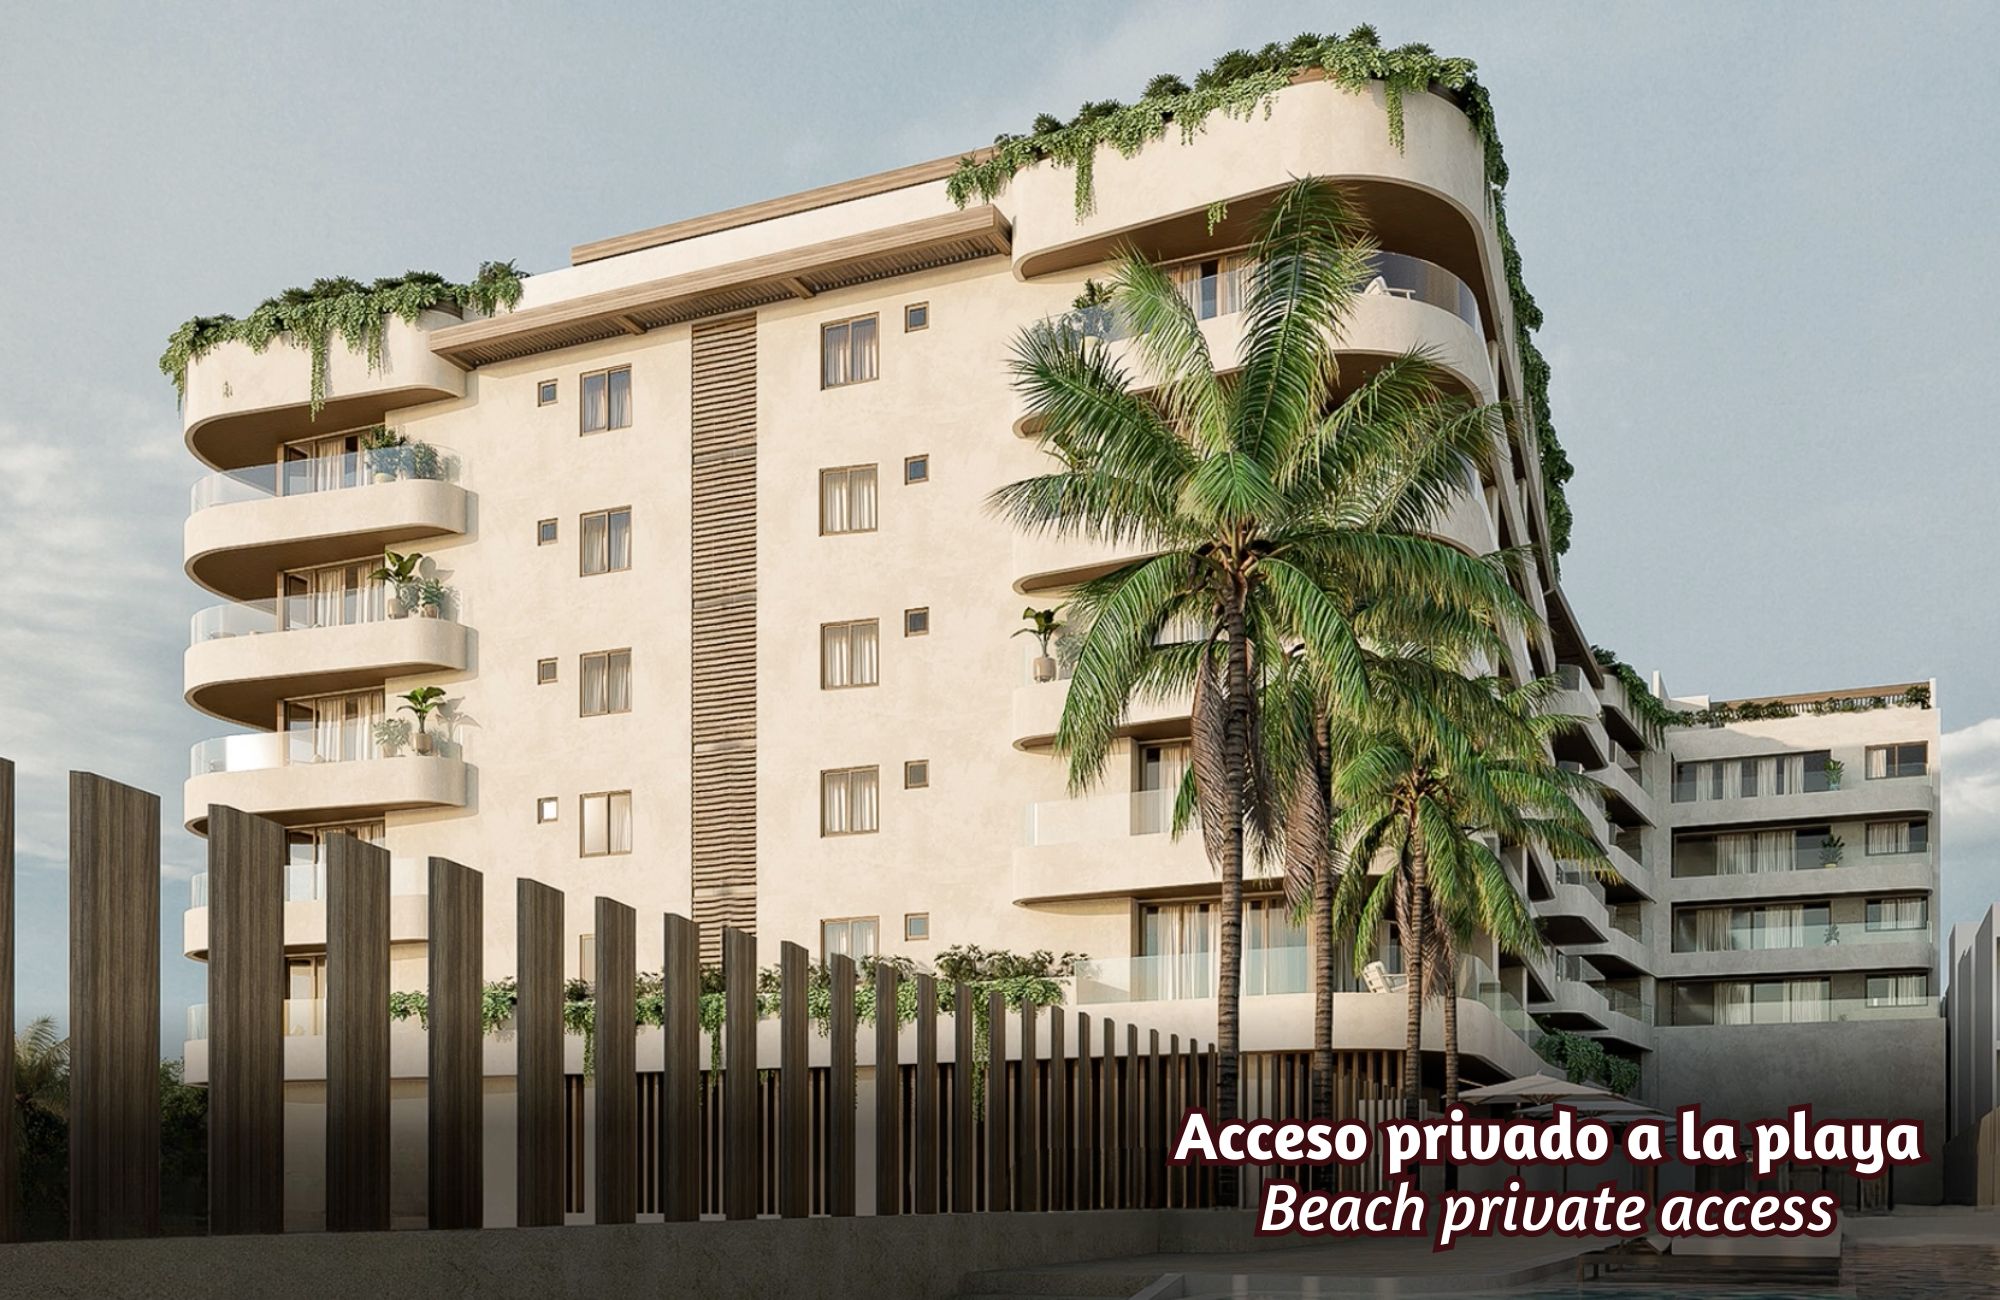 Apartment with terrace, beach access, pet-friendly, for sale in Puerto Morelos.